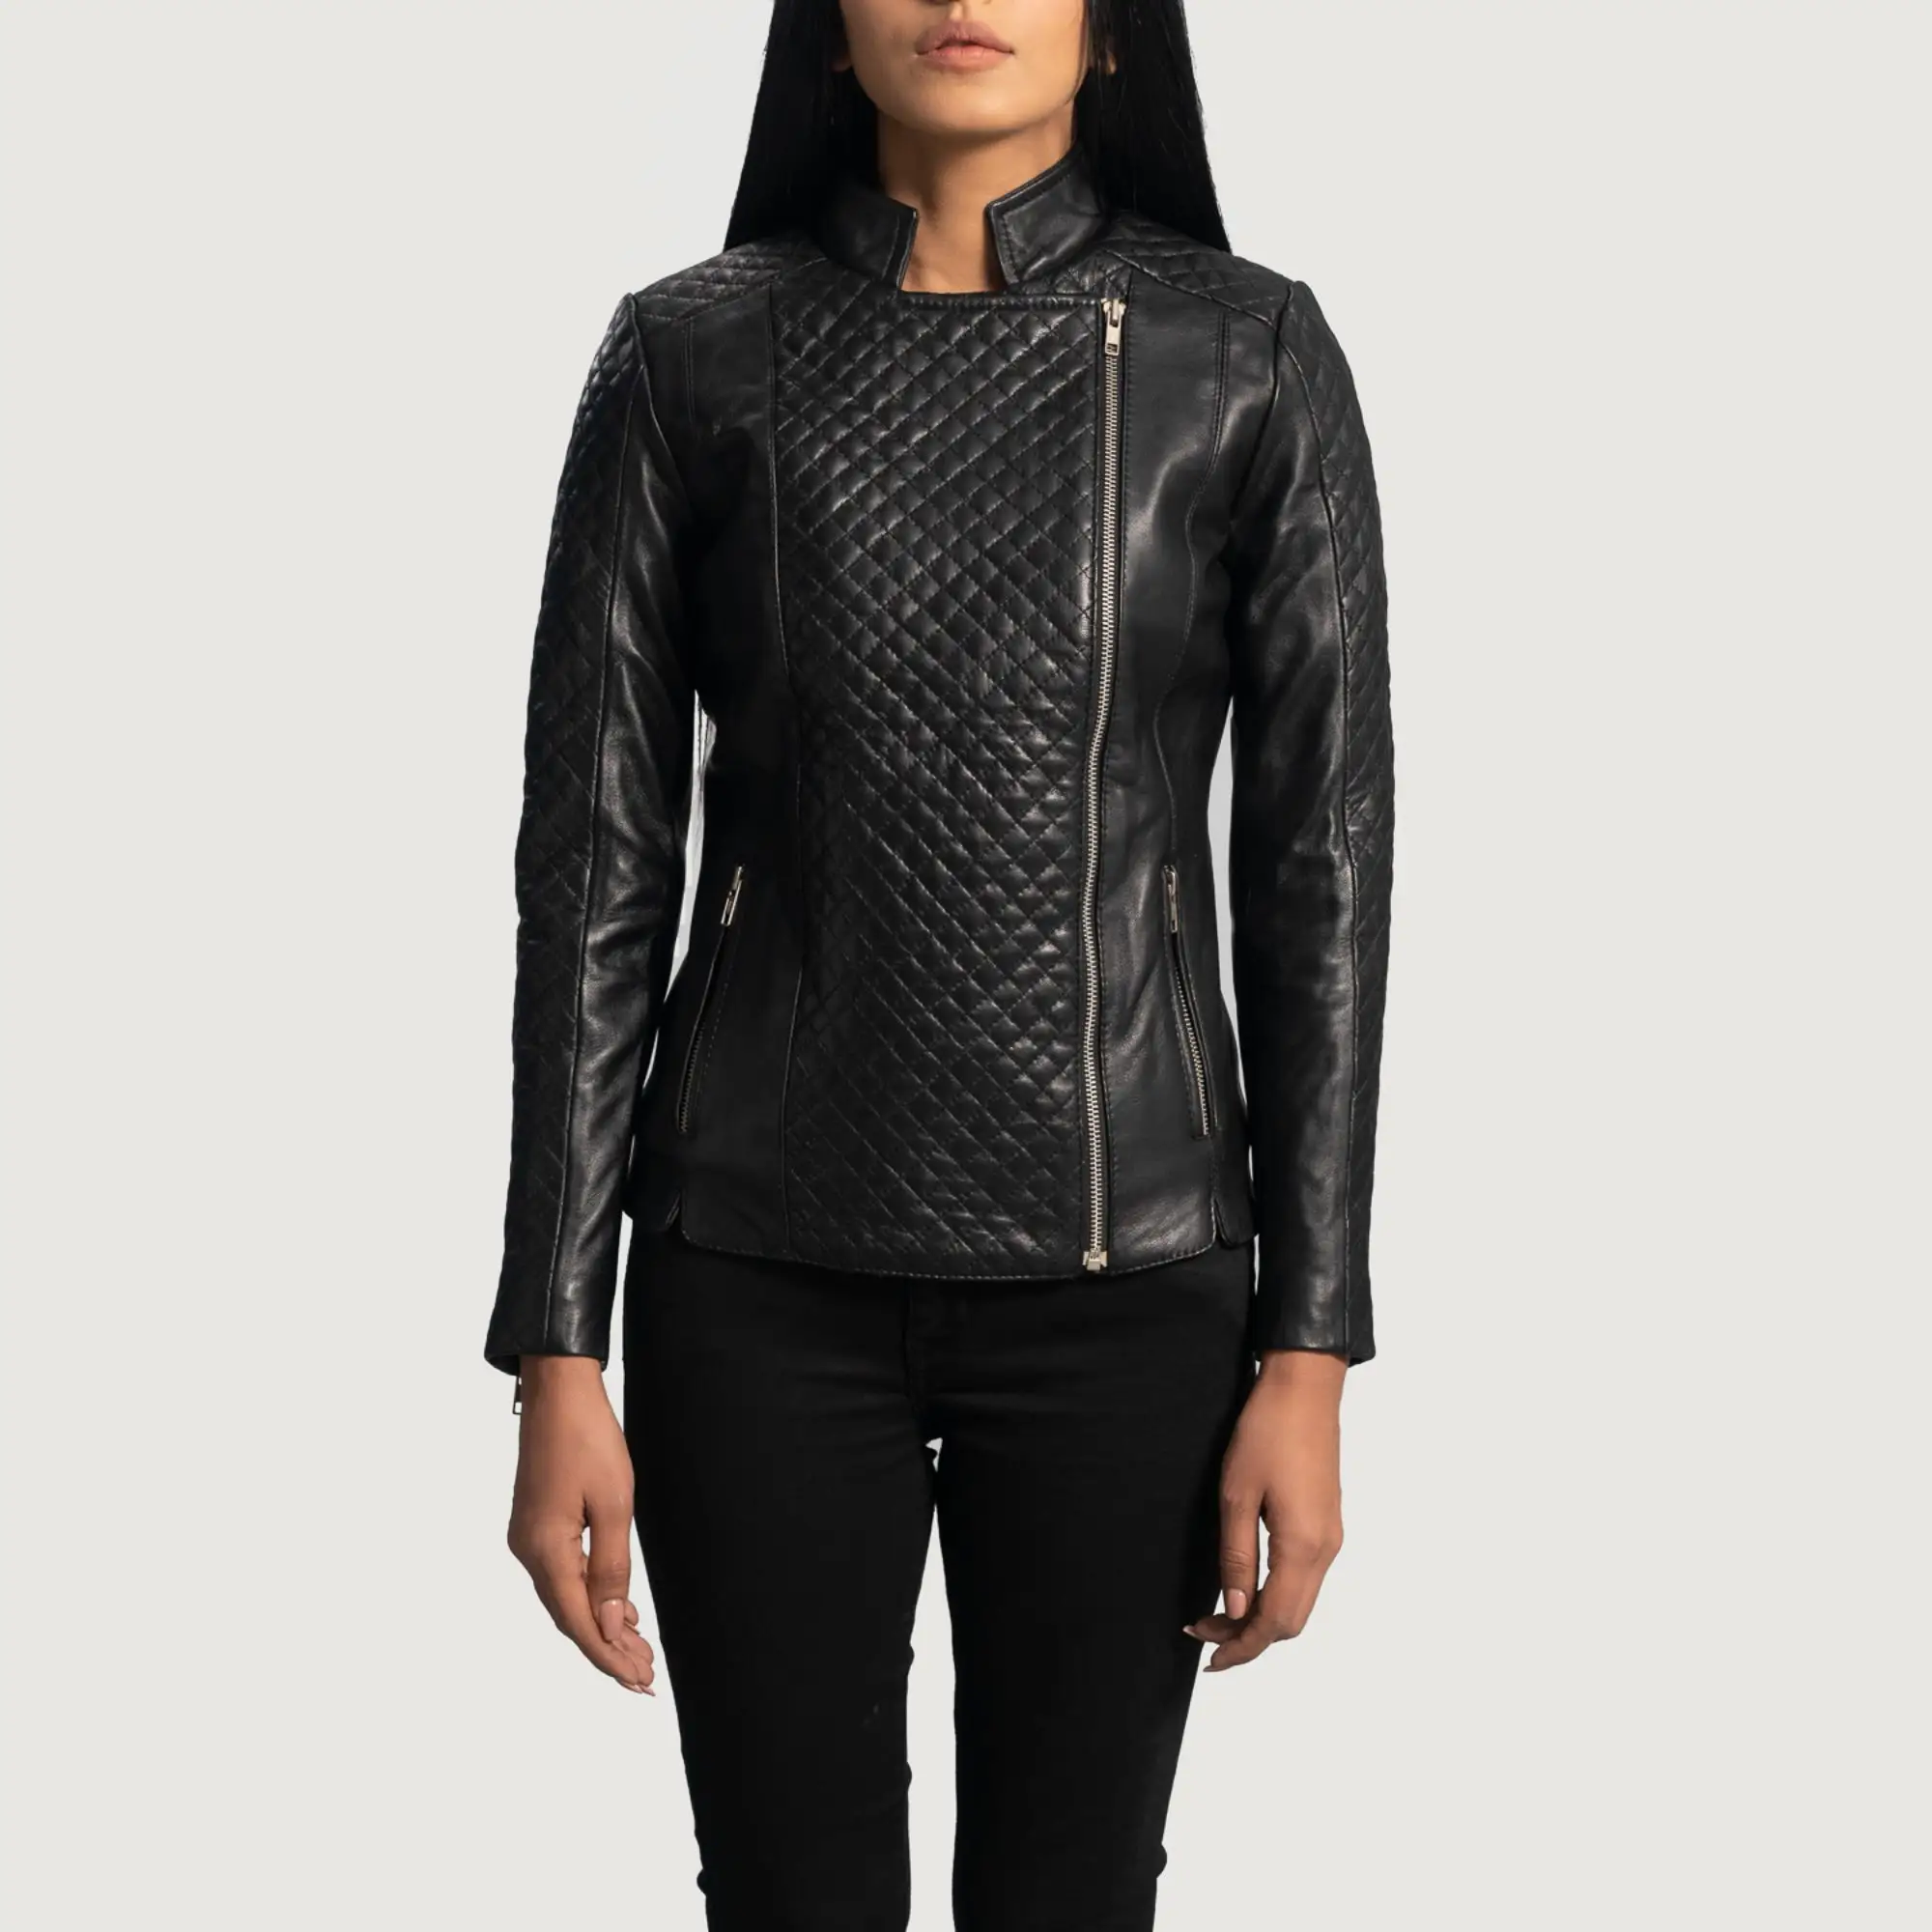 Real Leather Sheepskin Aniline Zipper Orient Grain Quilted Black Women Biker Jacket with Quilted Viscose Lining and Inside Outsi